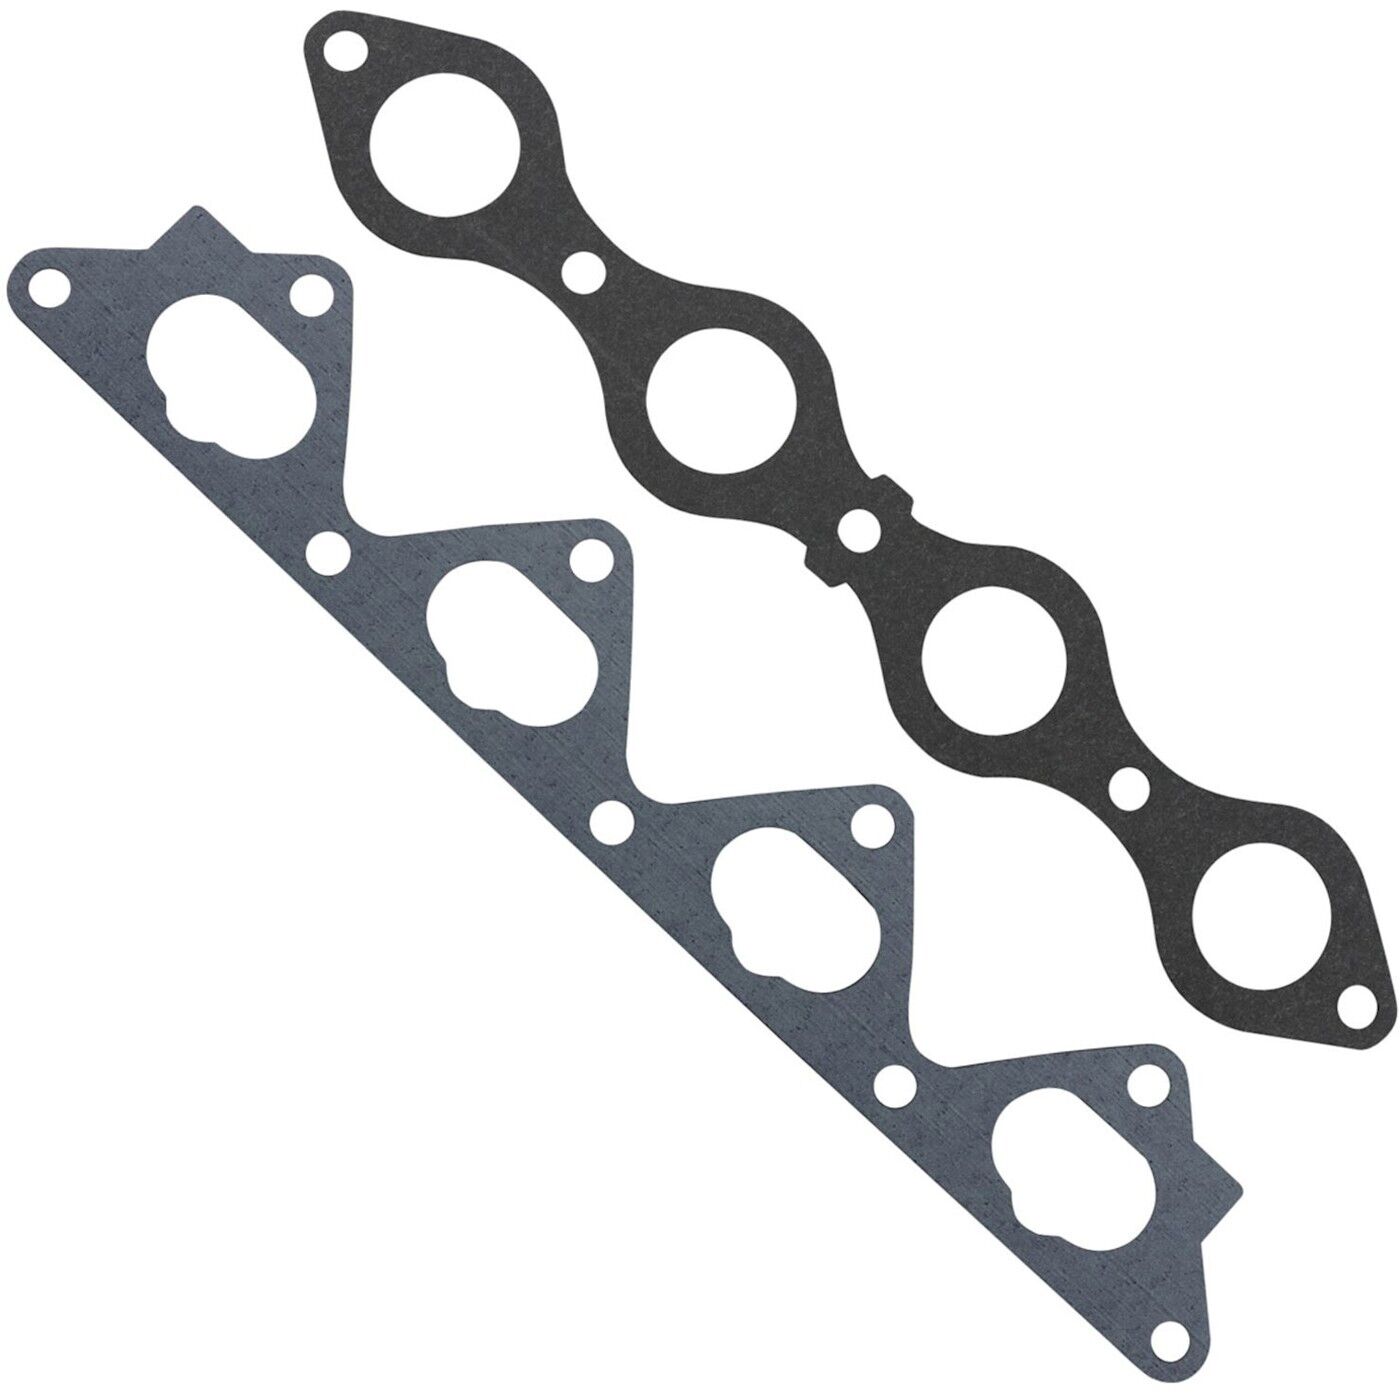 Set Intake Manifold Gaskets for Hyundai Accent Scoupe 1993-1995